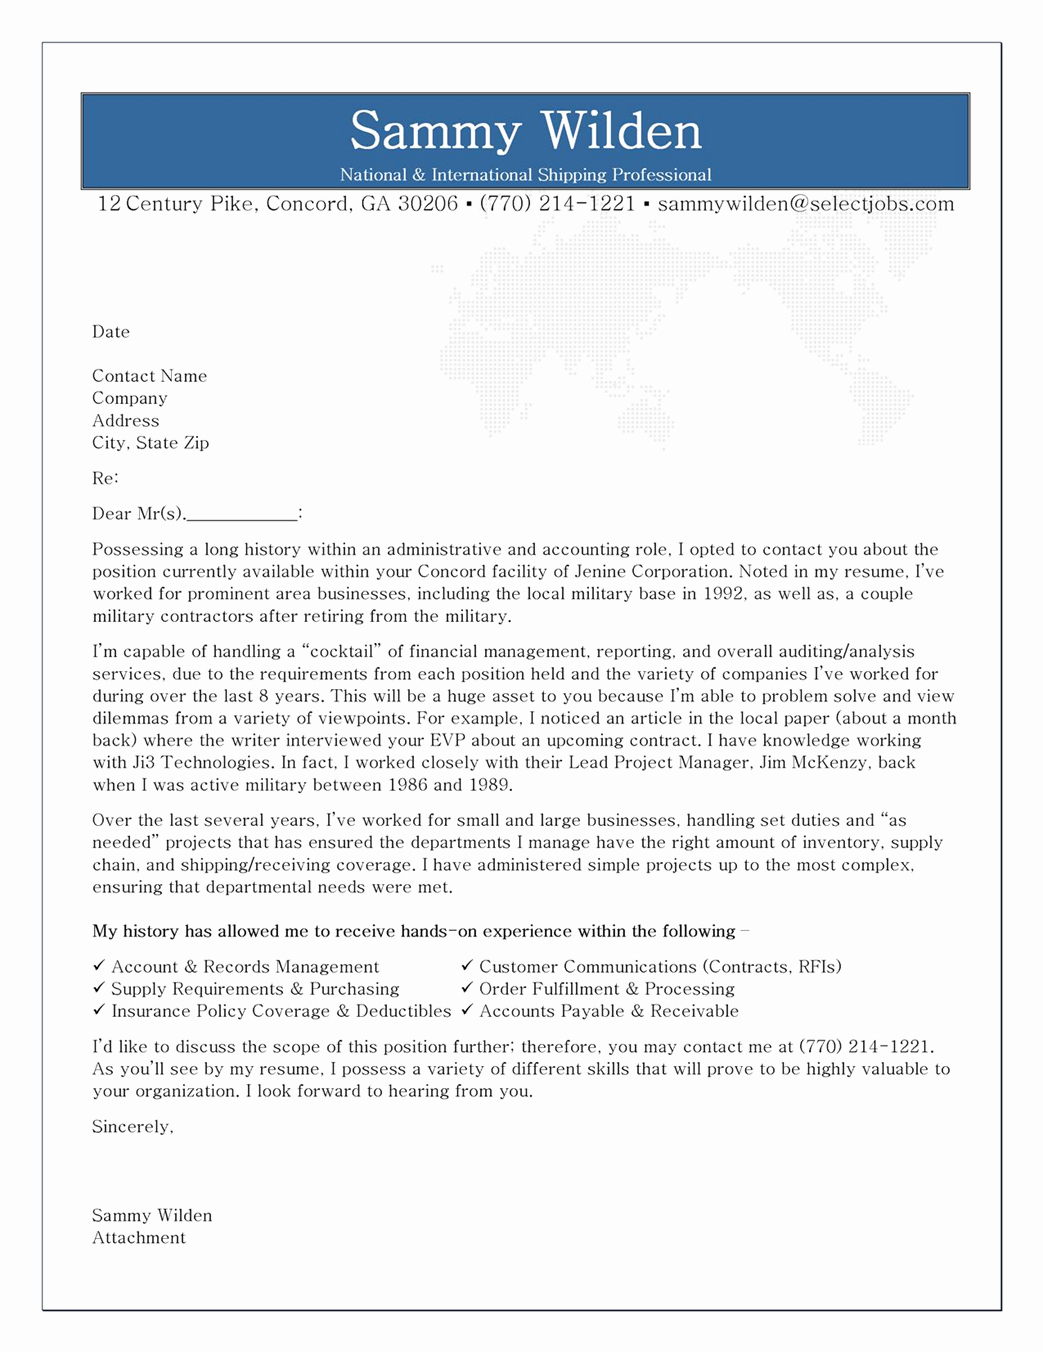 Cover Letter Example for Shipping &amp; Receiving Professional